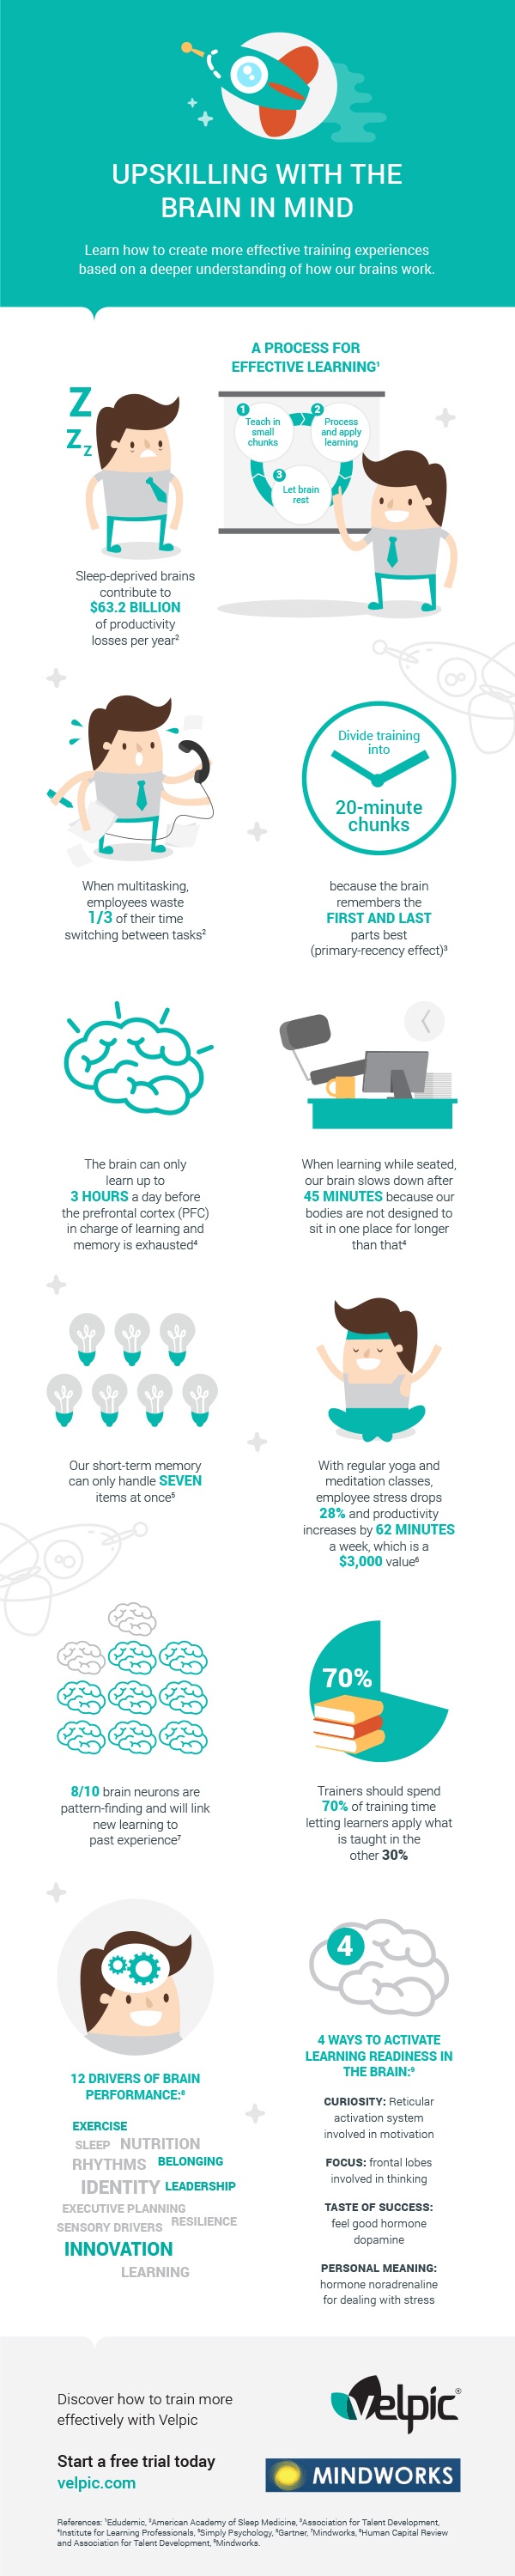 Upskilling With The Brain In Mind Infographic